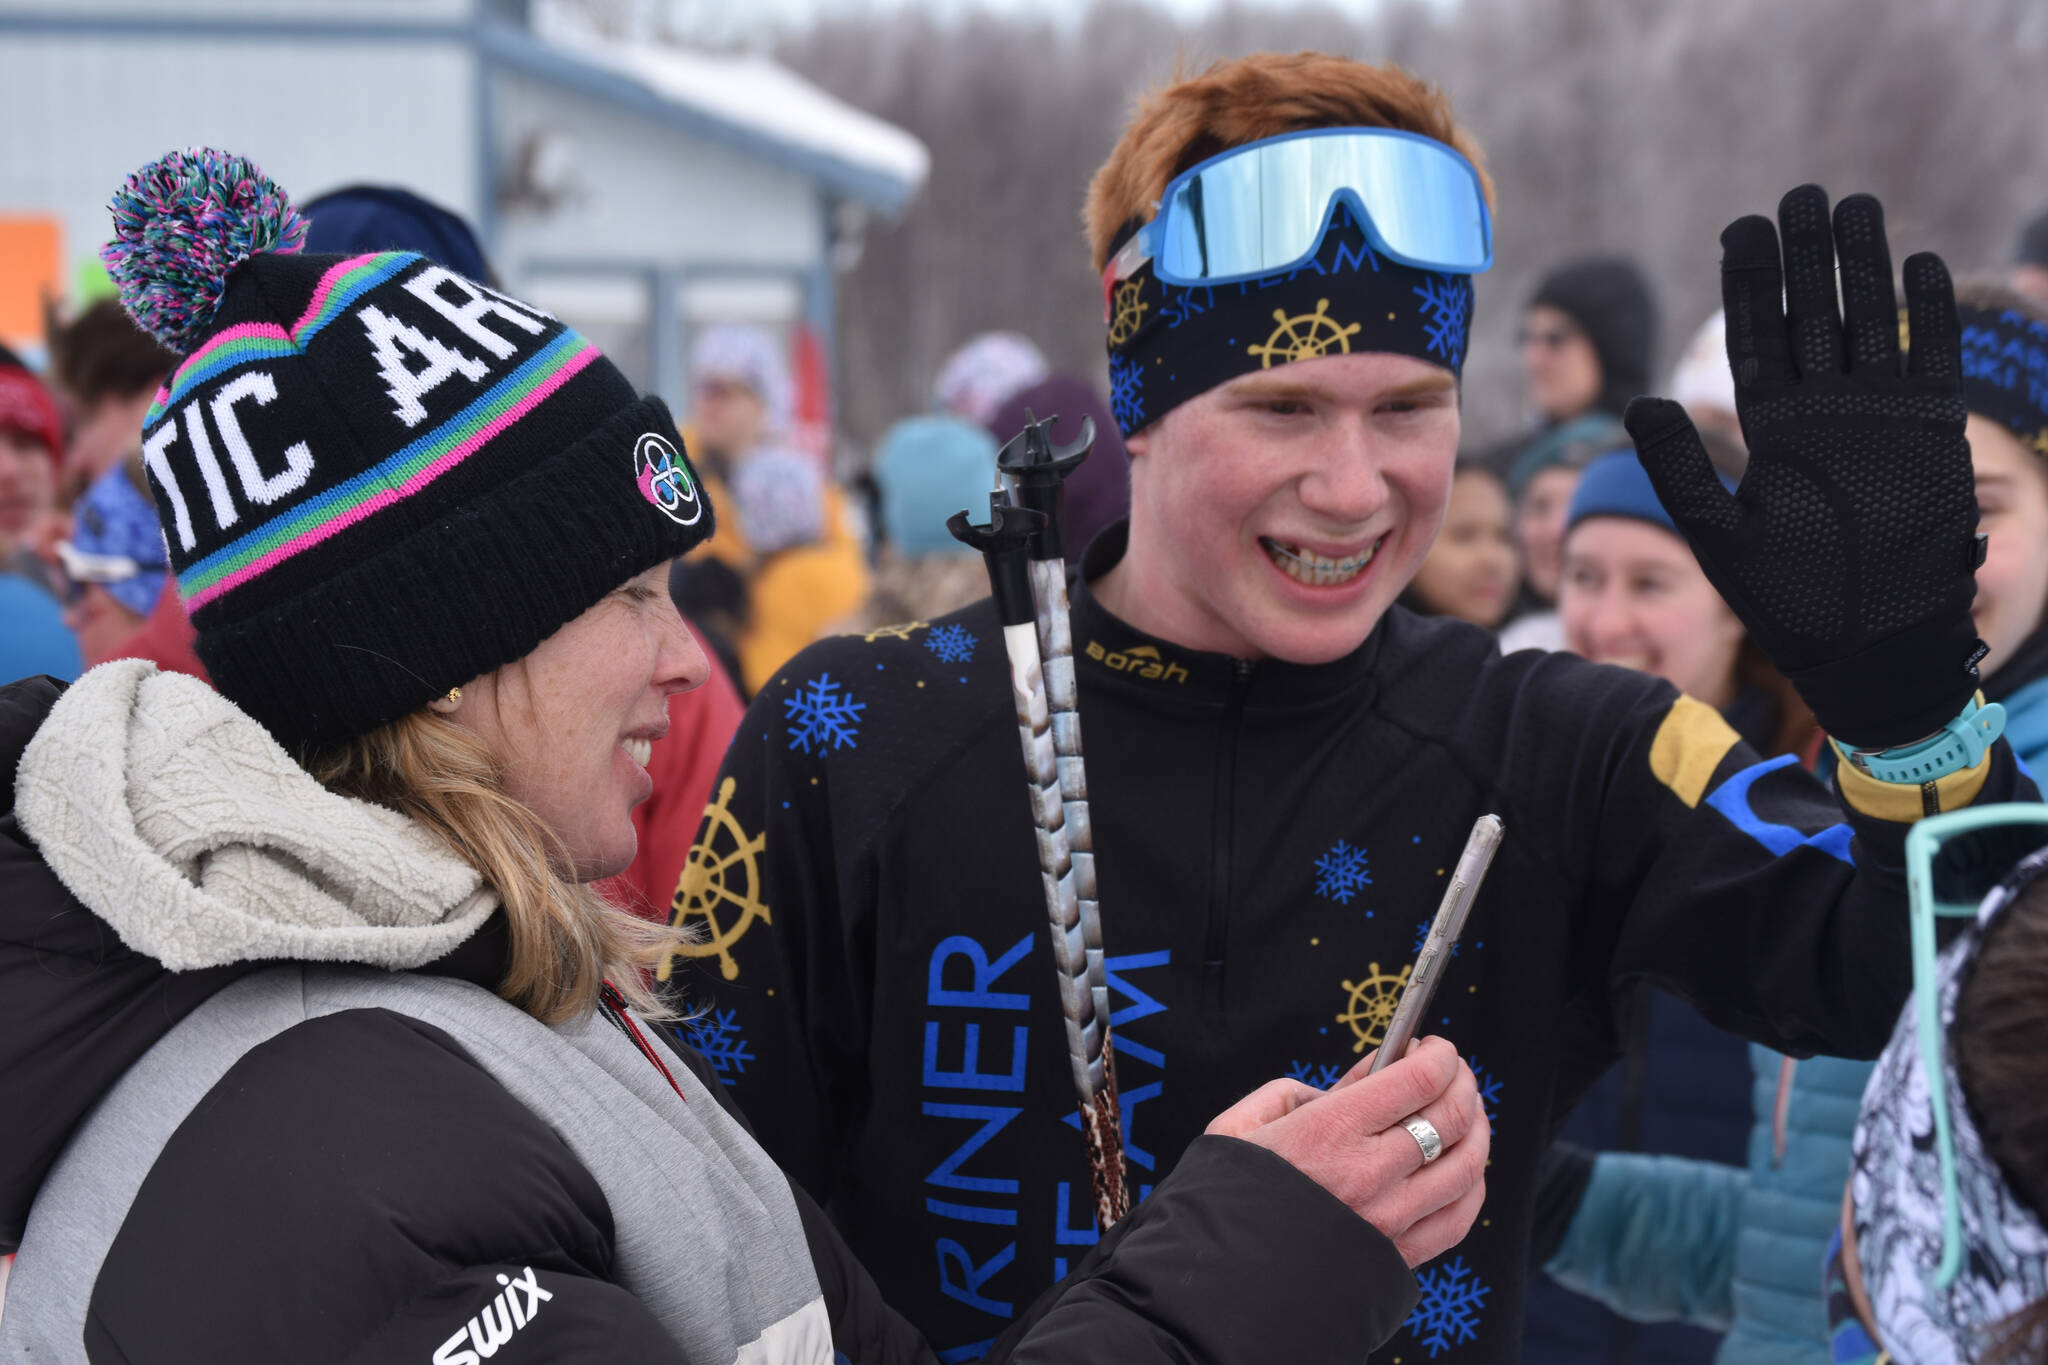 Jody Goodrich reaches out for a high five and smiles alongside Jessie Goodrich, his mother and coach, after he completed the final leg of the boys 4x5-kilometer relay and secured the Homer boys’ program-first Division II win at the ASAA State Nordic Ski Championships at Kincaid Park in Anchorage, Alaska, on Saturday, Feb. 25, 2023. (Jake Dye/Peninsula Clarion)